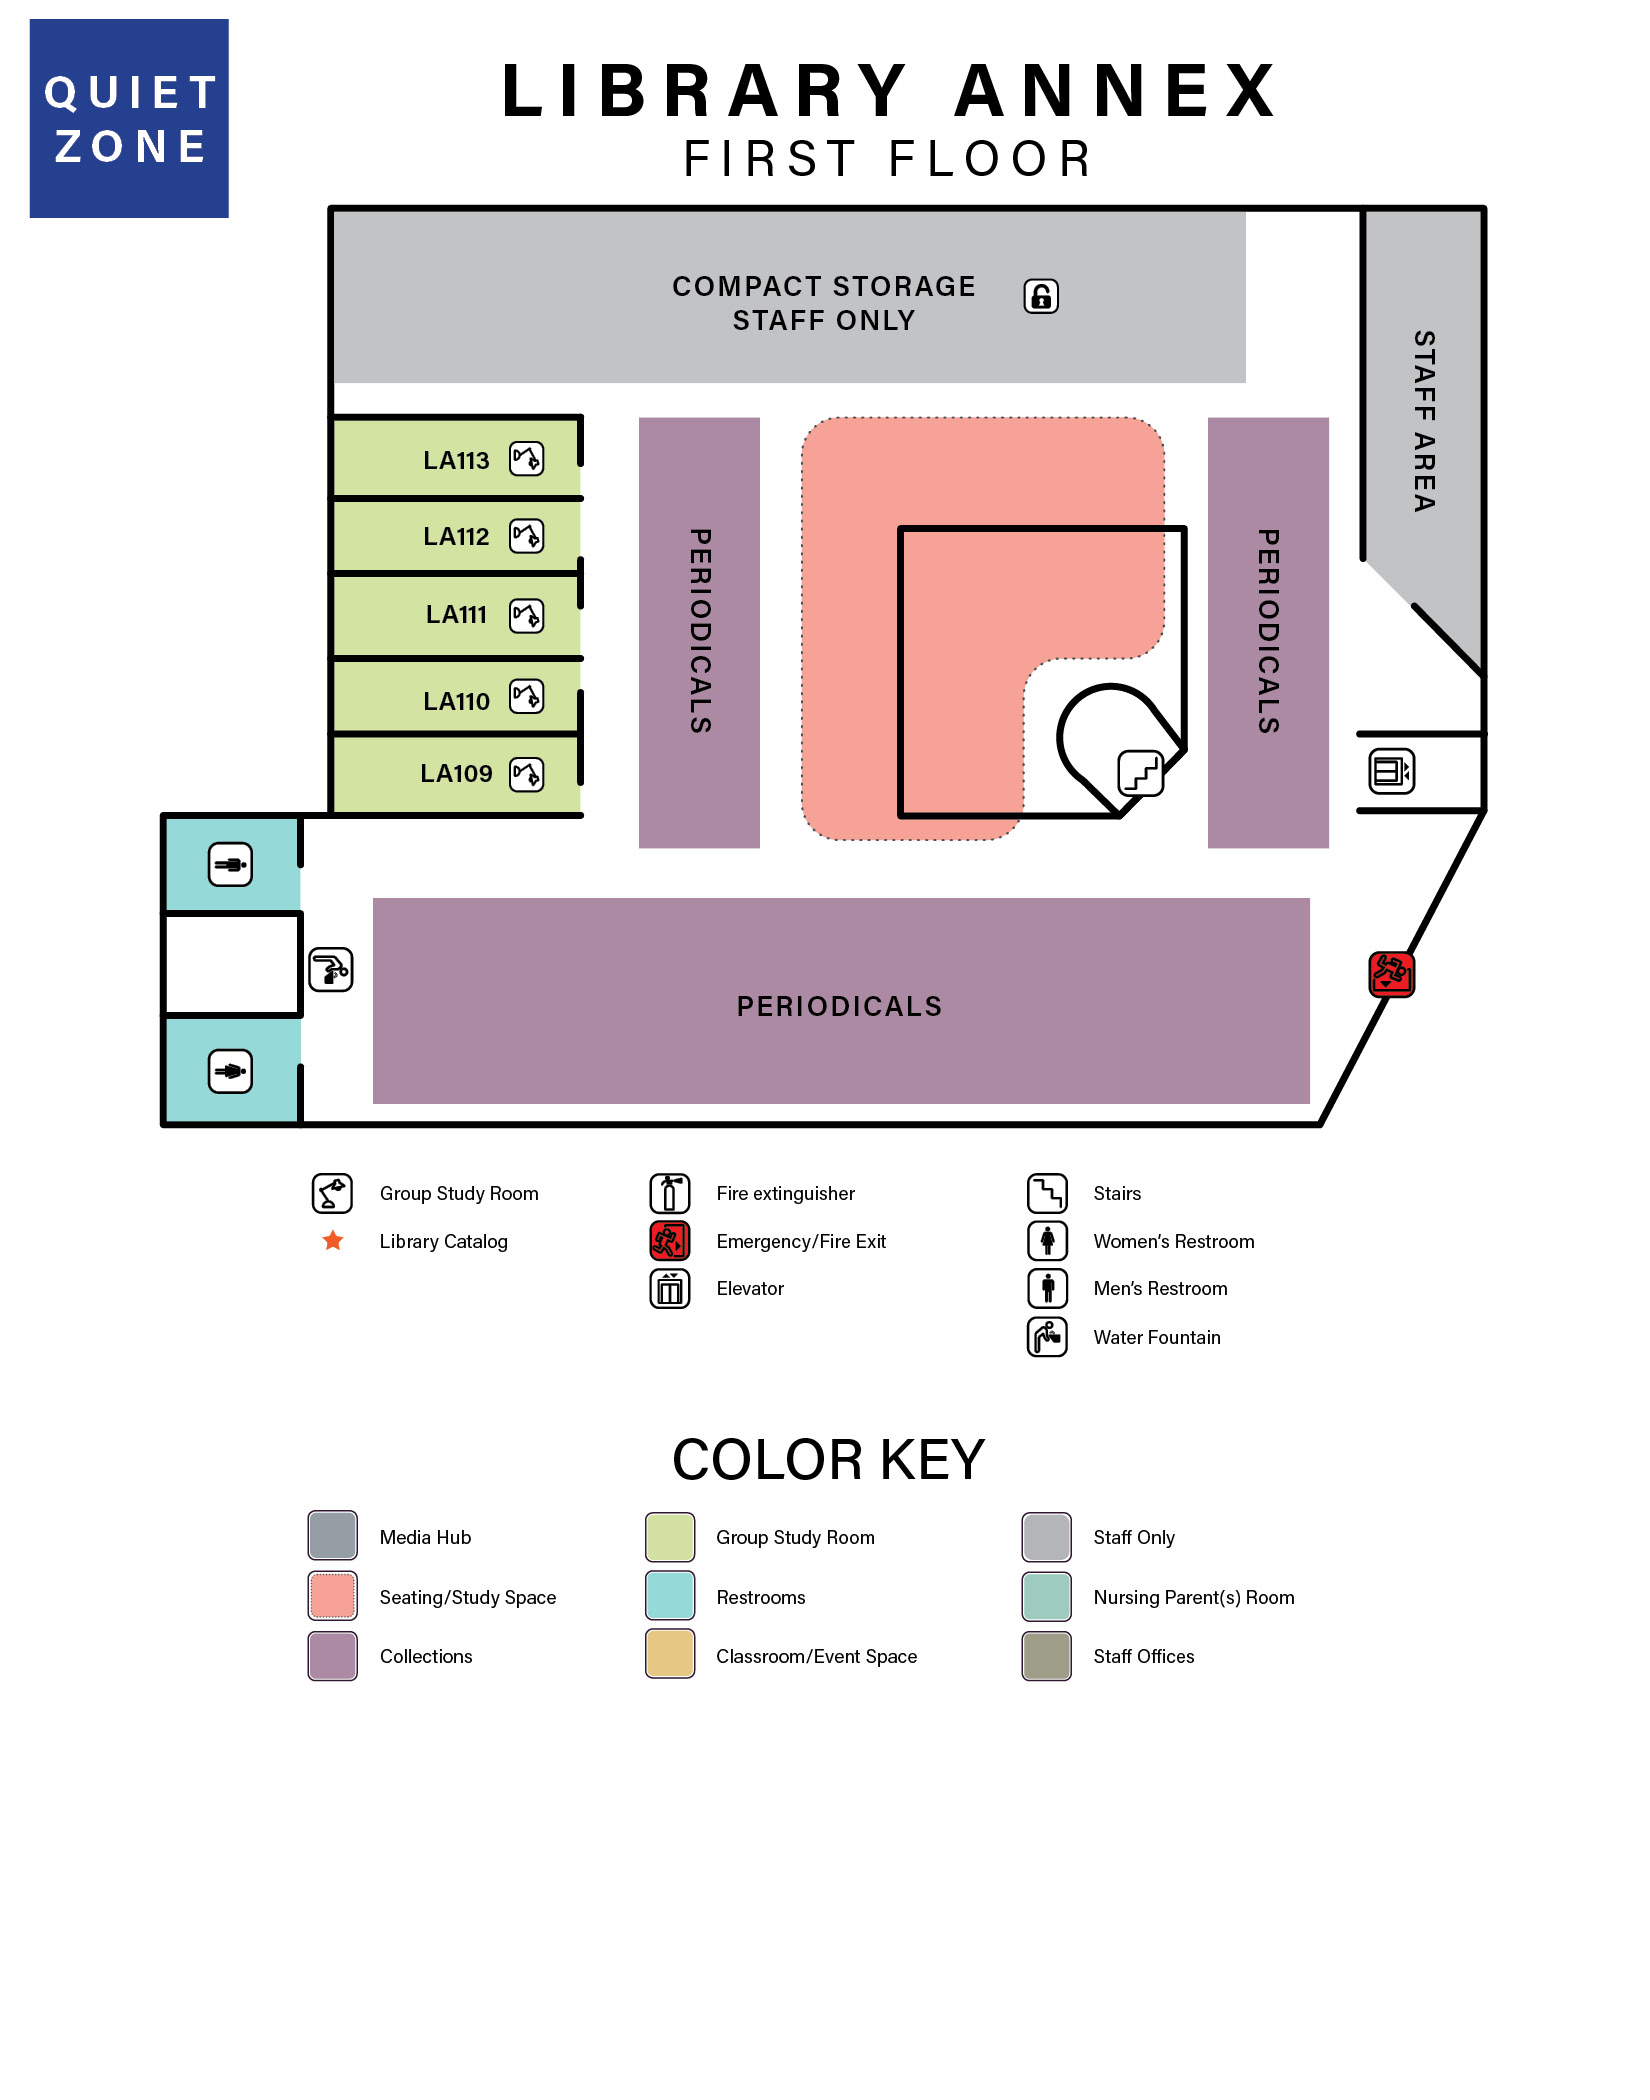 map of library annex first floor which includes descriptions of spaces and colored areas indicating types of spaces